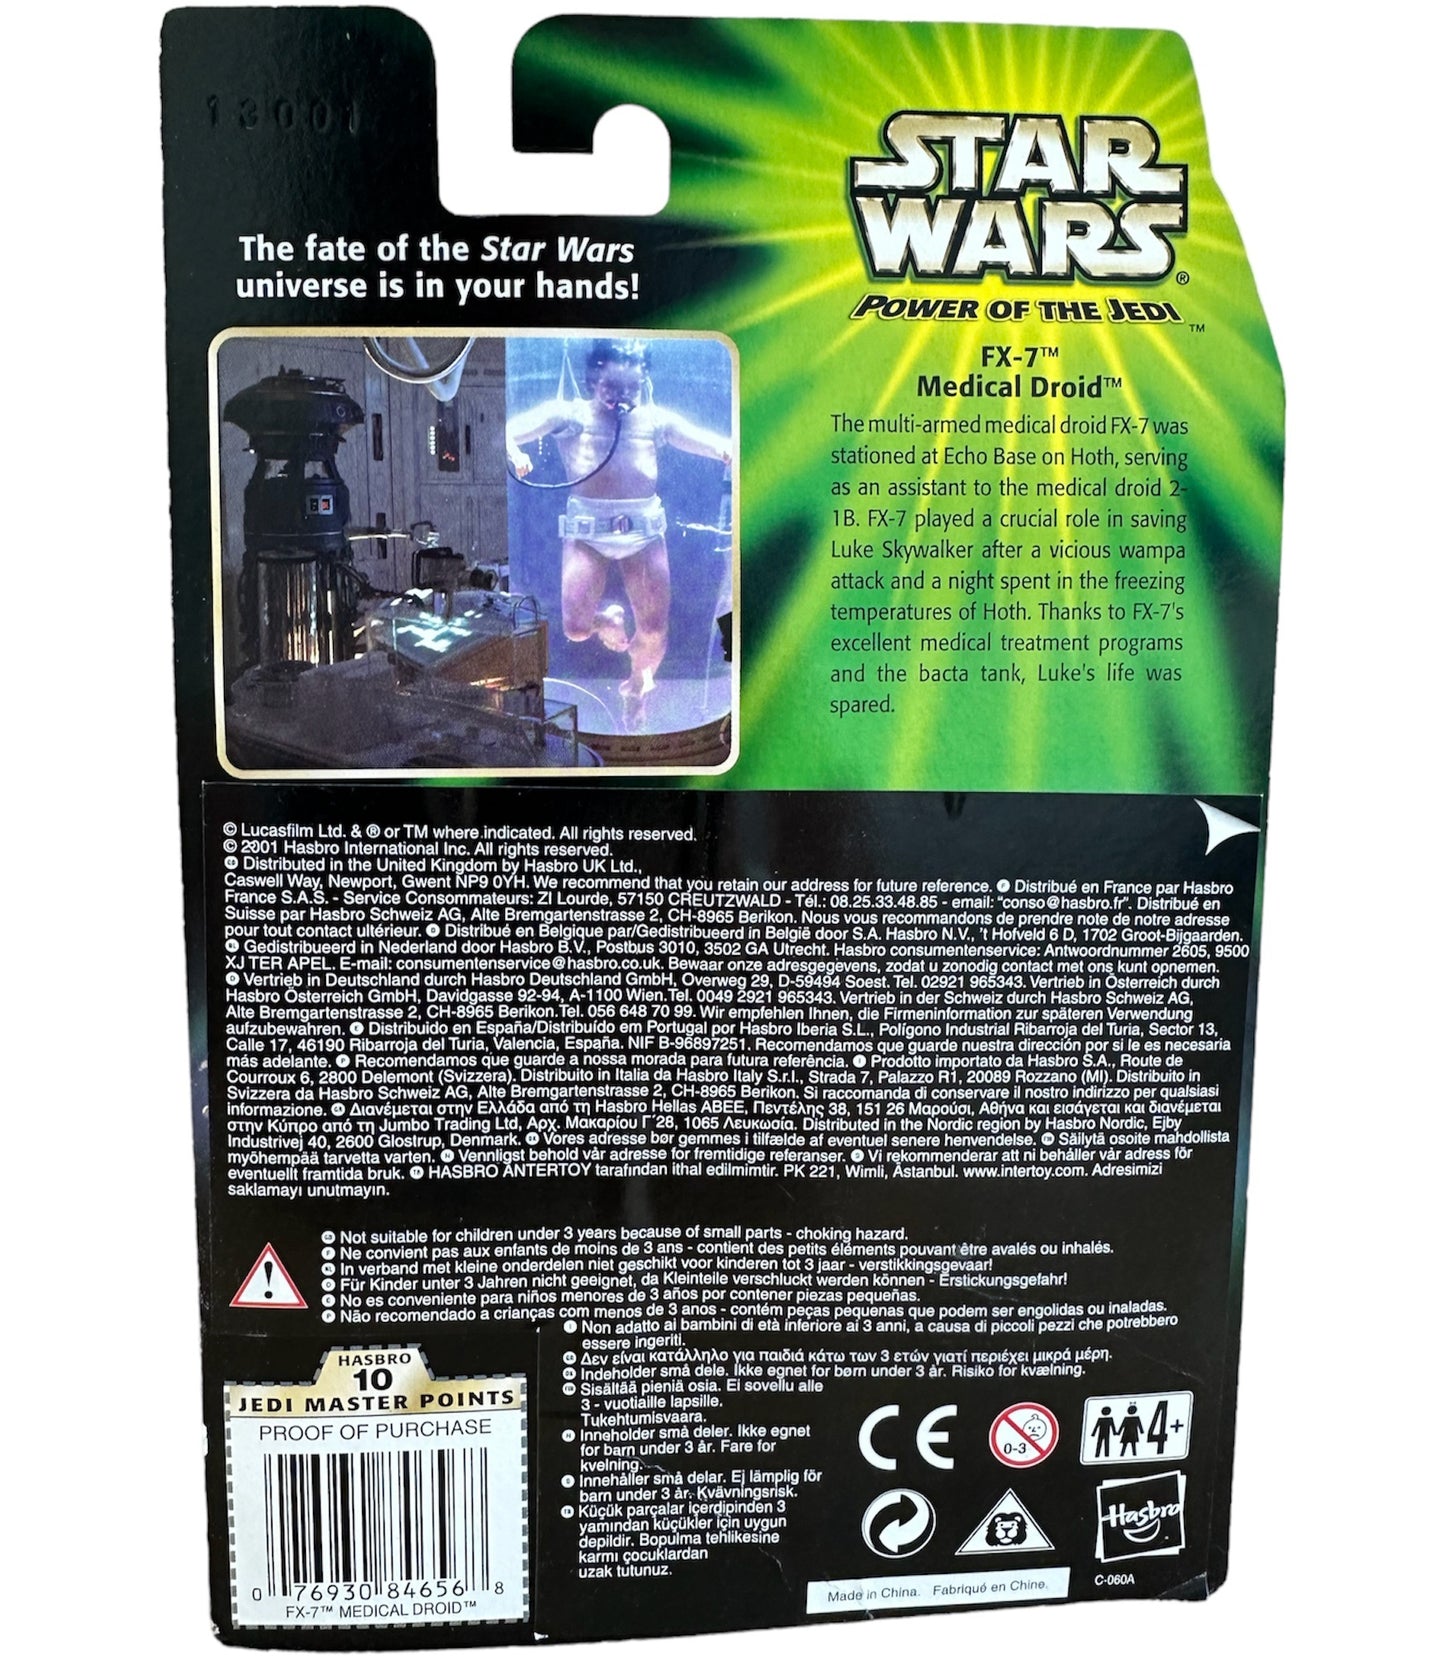 Vintage 2001 Star Wars The Power Of The Jedi FX-7 Medical Droid Action Figure - Brand New Factory Sealed Shop Stock Room Find